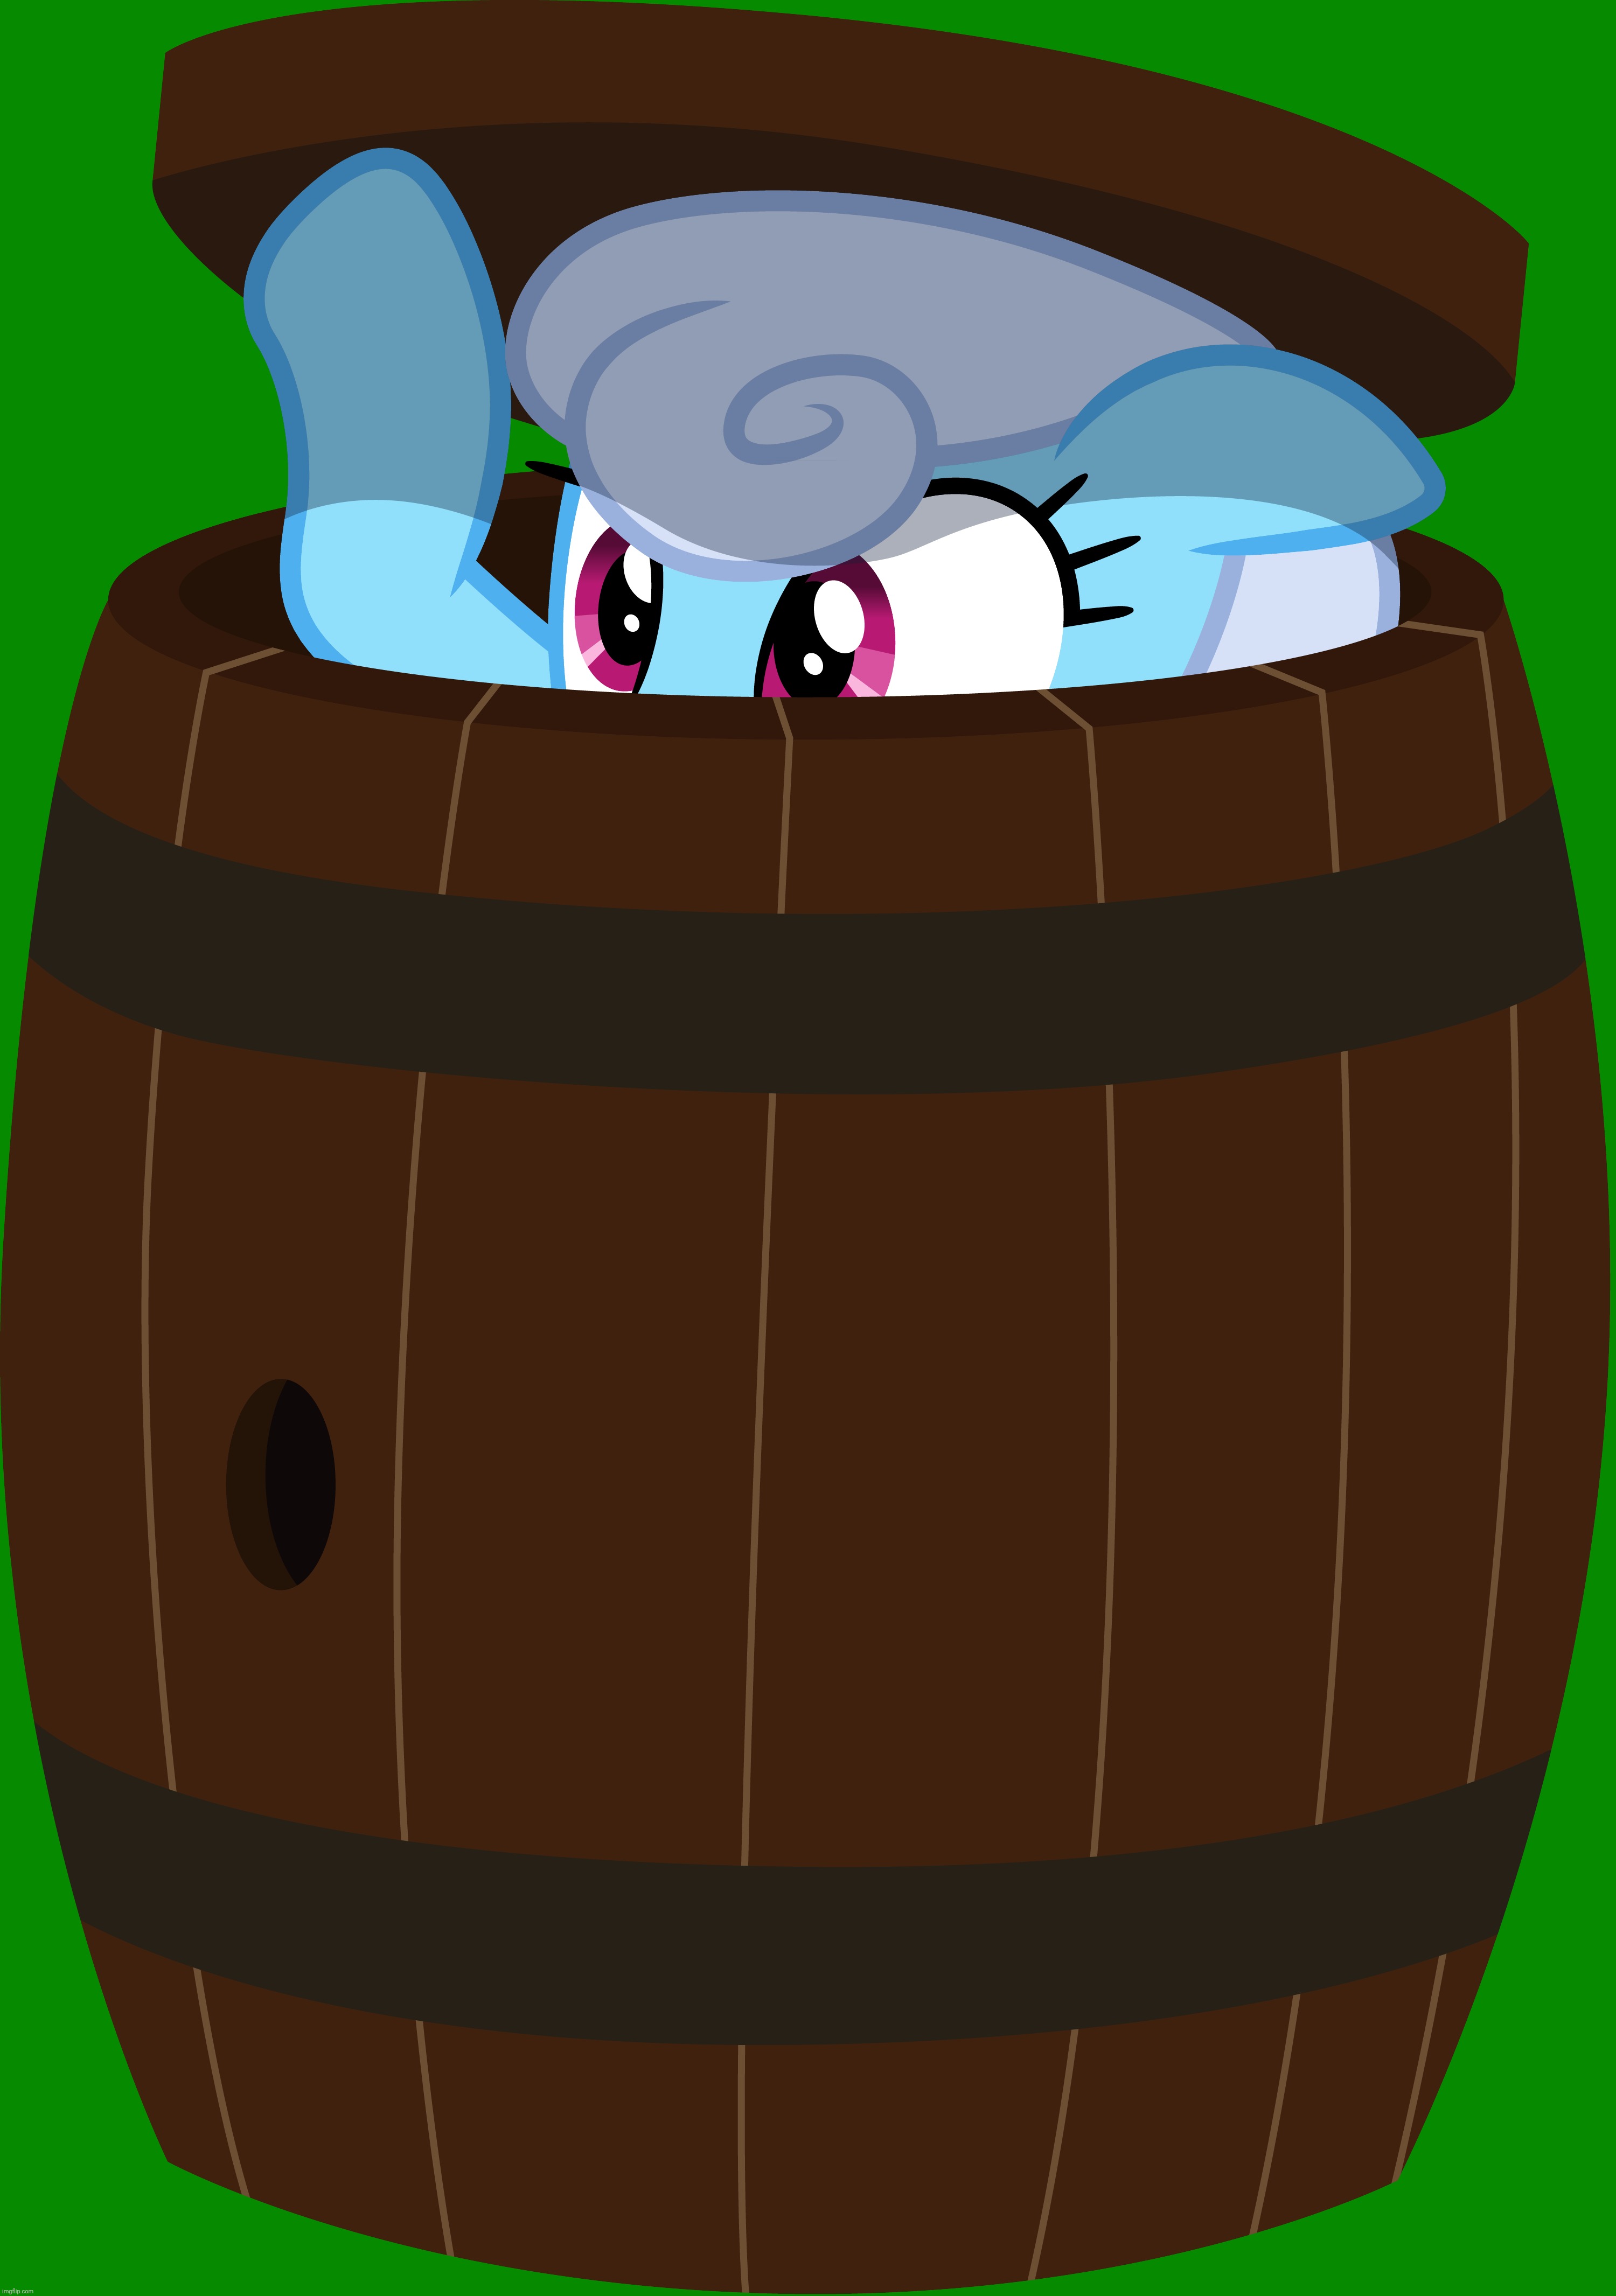 shoeshine/linky in the barrel | image tagged in my little pony friendship is magic,barrel | made w/ Imgflip meme maker